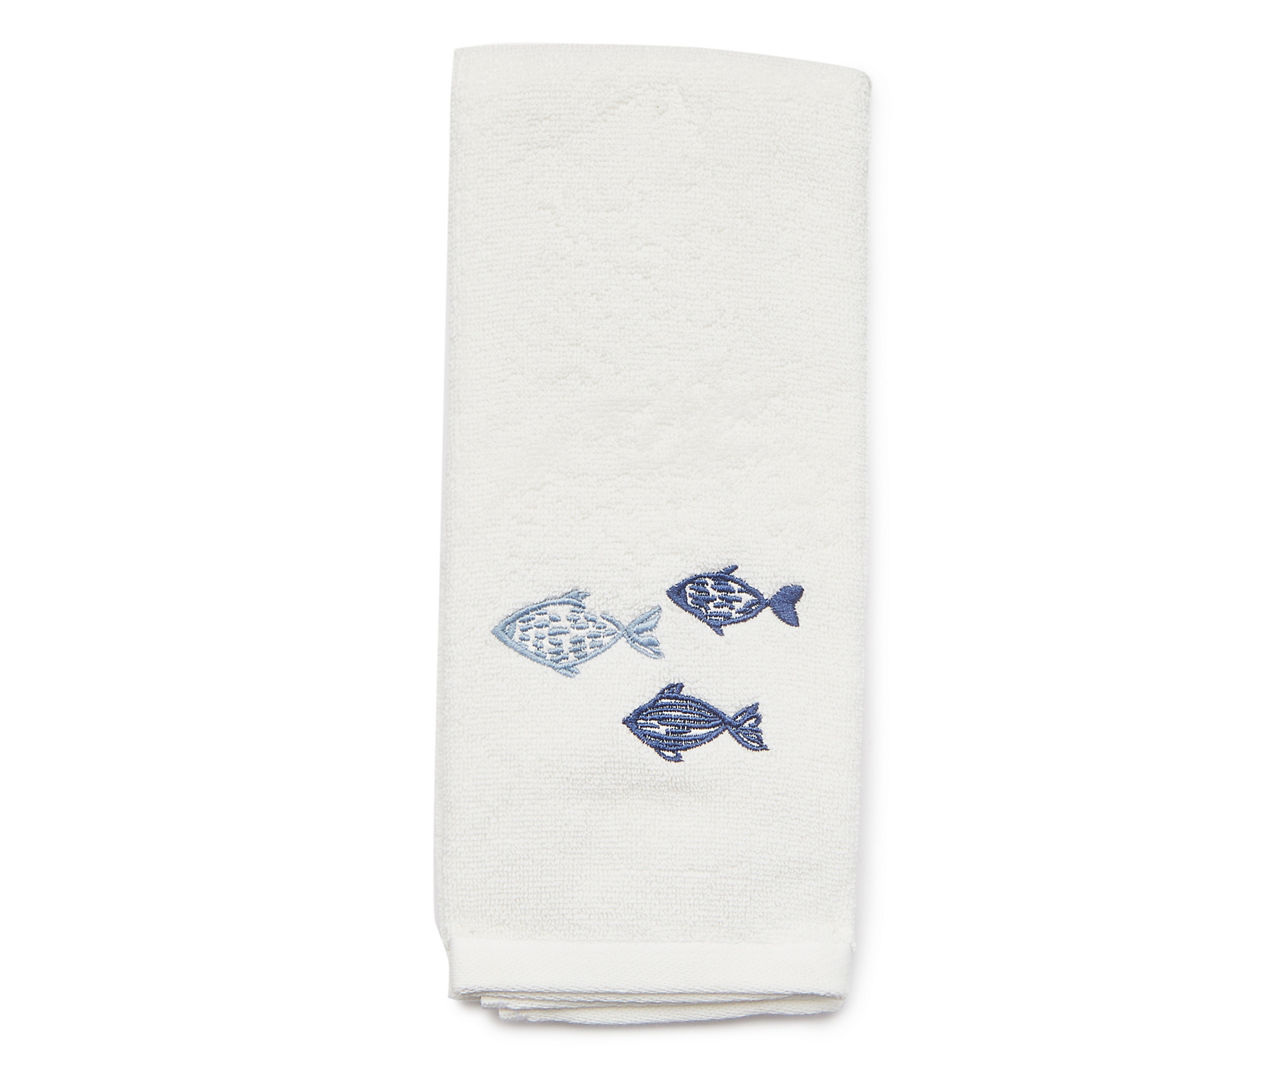 Seahorse Embroidered Bath Hand Towel. Beautifully Detailed in Coppery Shades